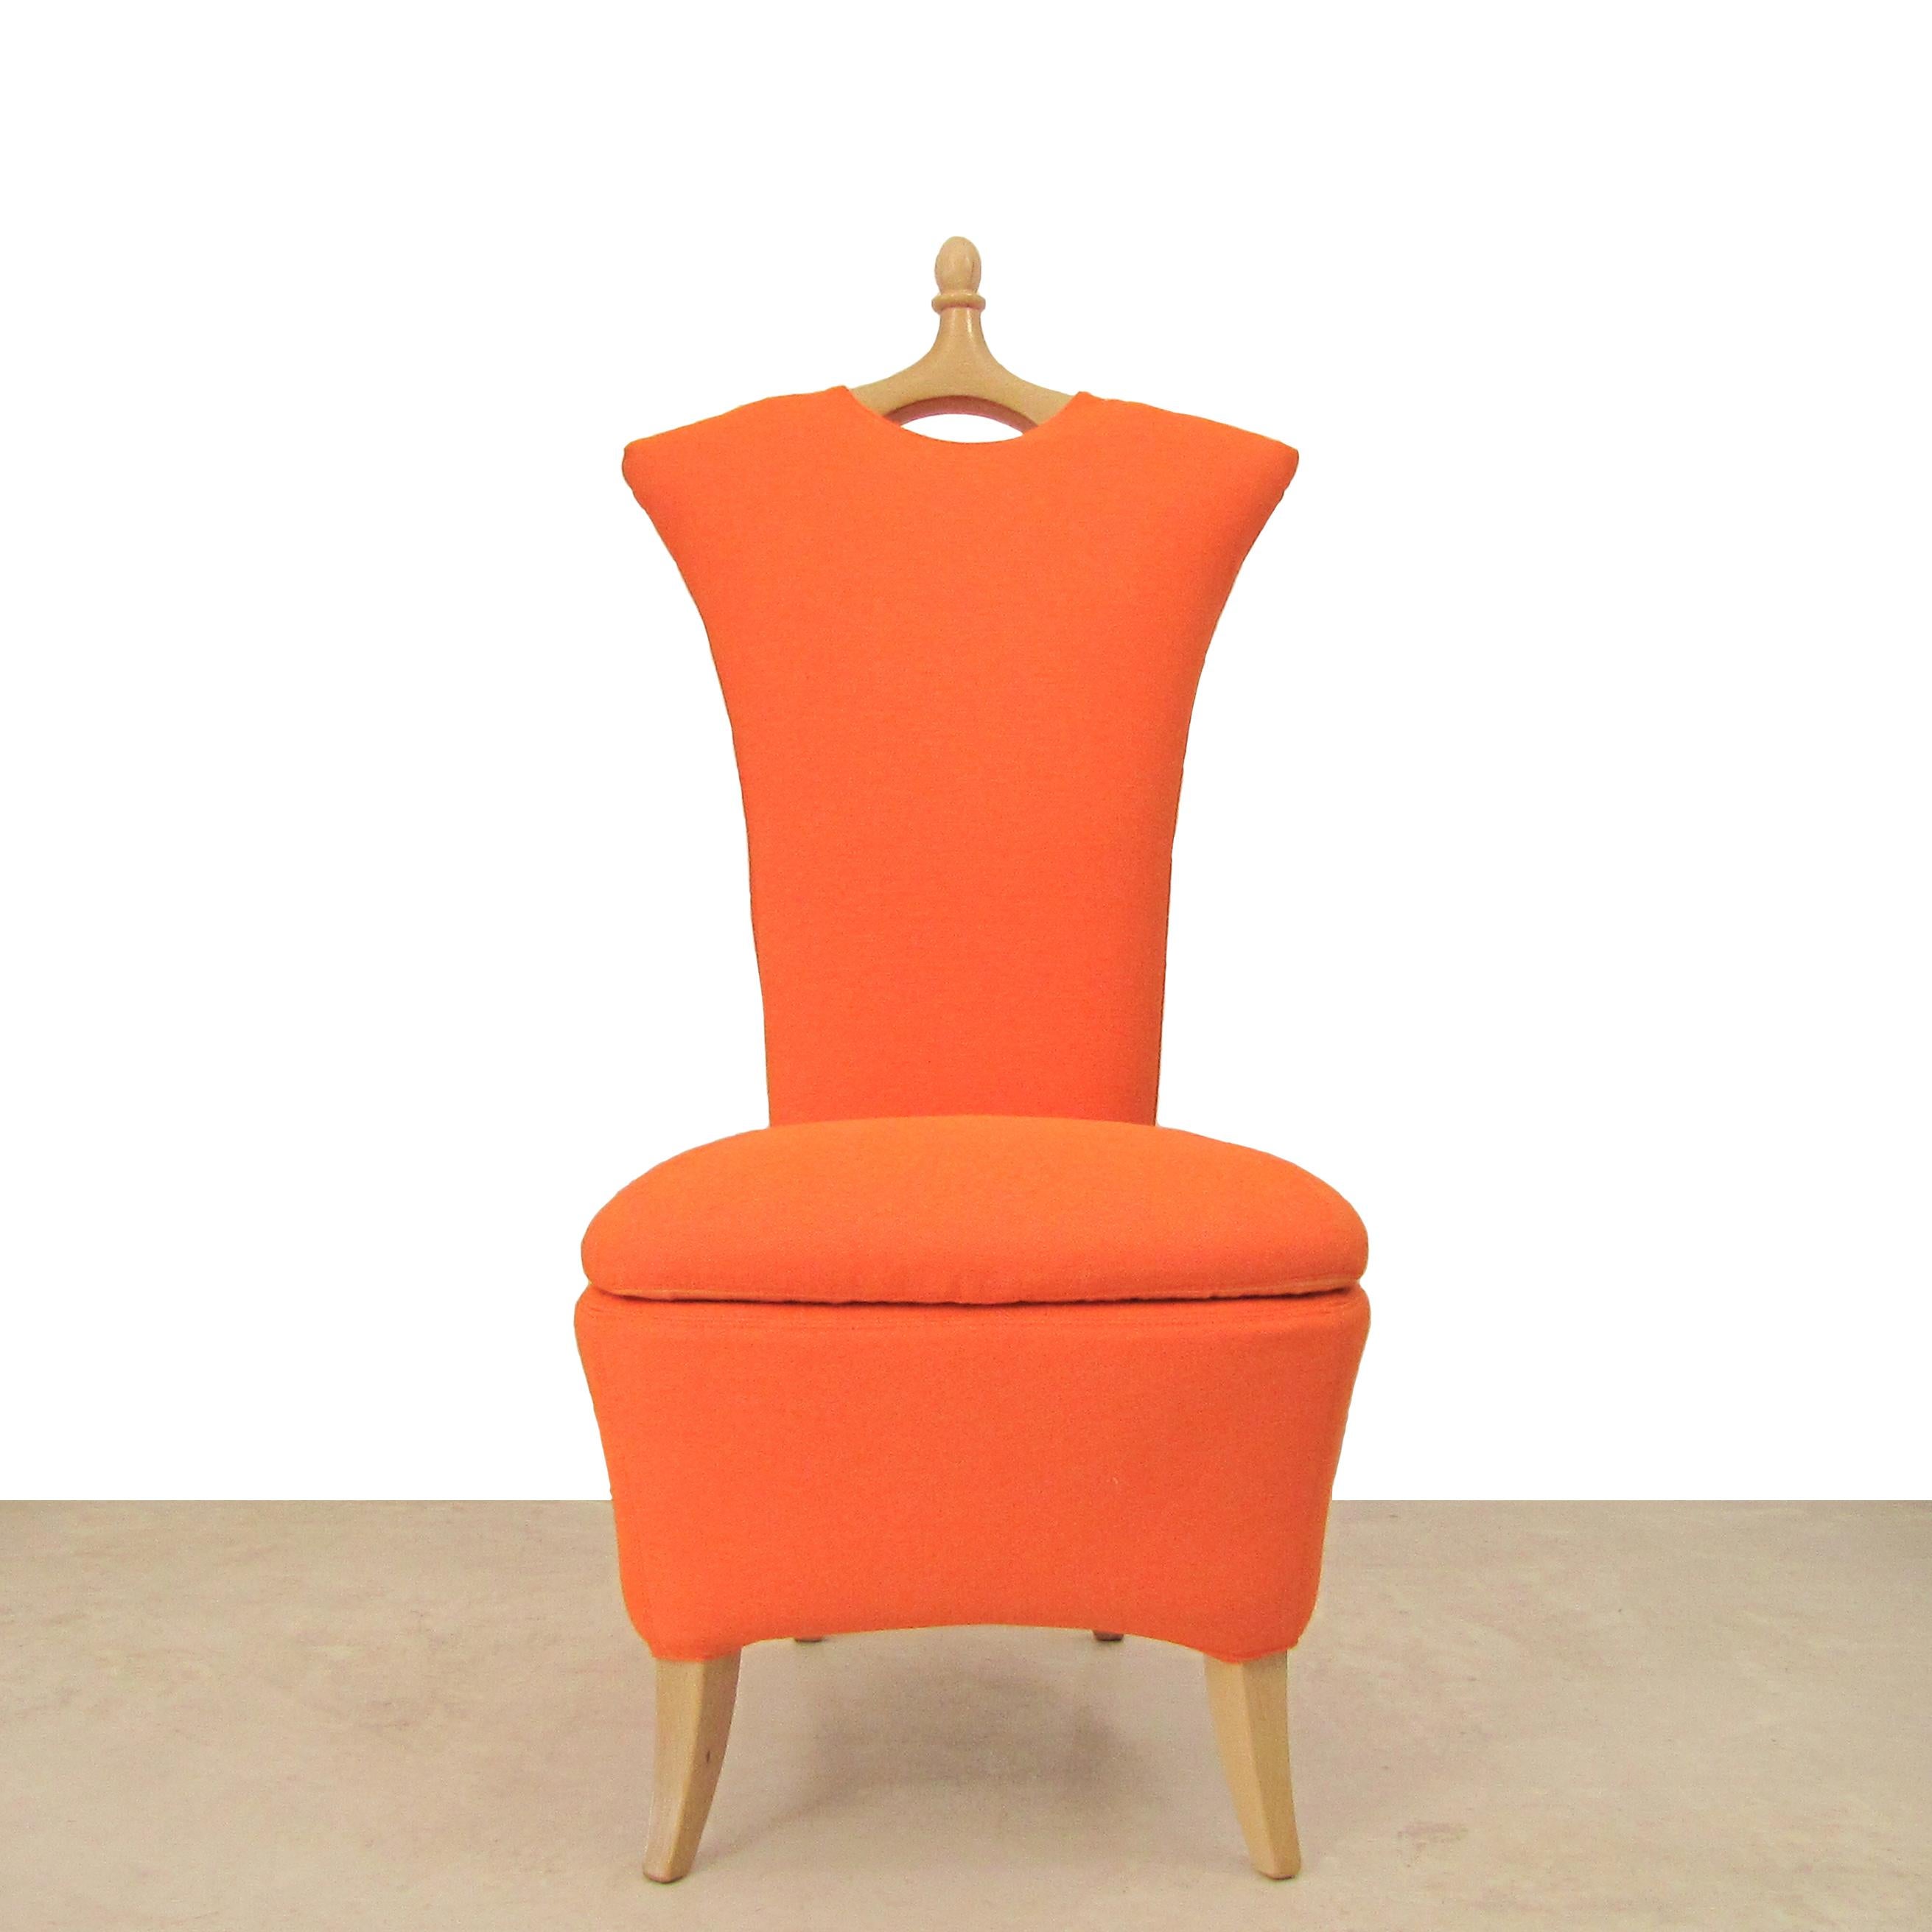 Giovannetti, Elegant and Functional Armchair by M. Lovi 90s, 